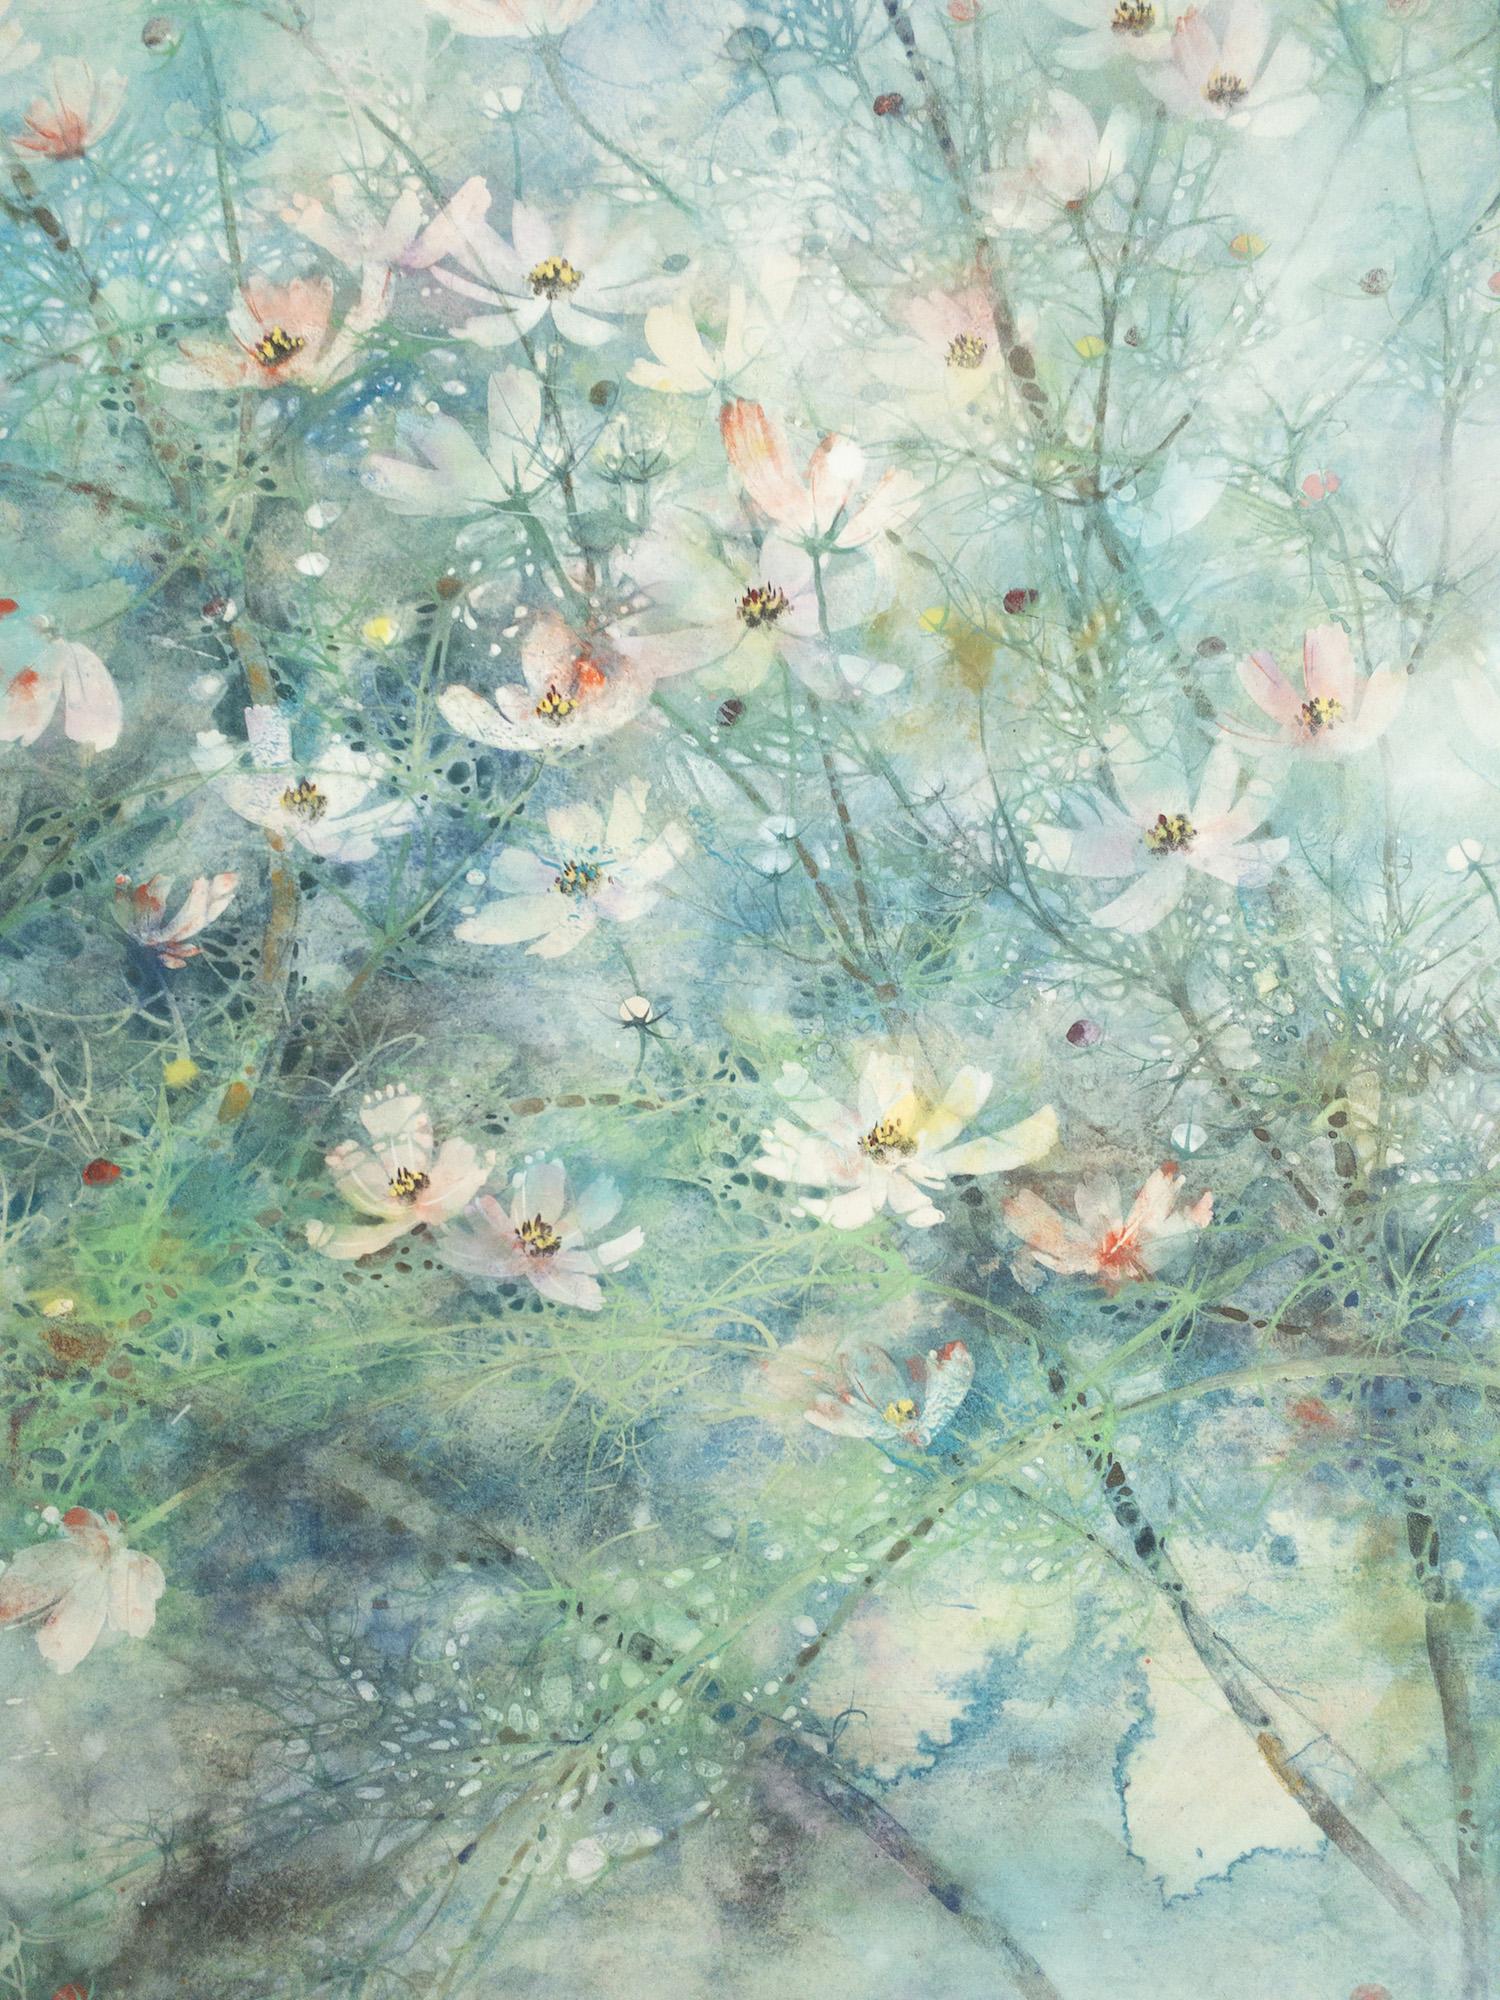 Hope by CHEN Yiching - Contemporary Nihonga painting, cosmos flowers, blue For Sale 3